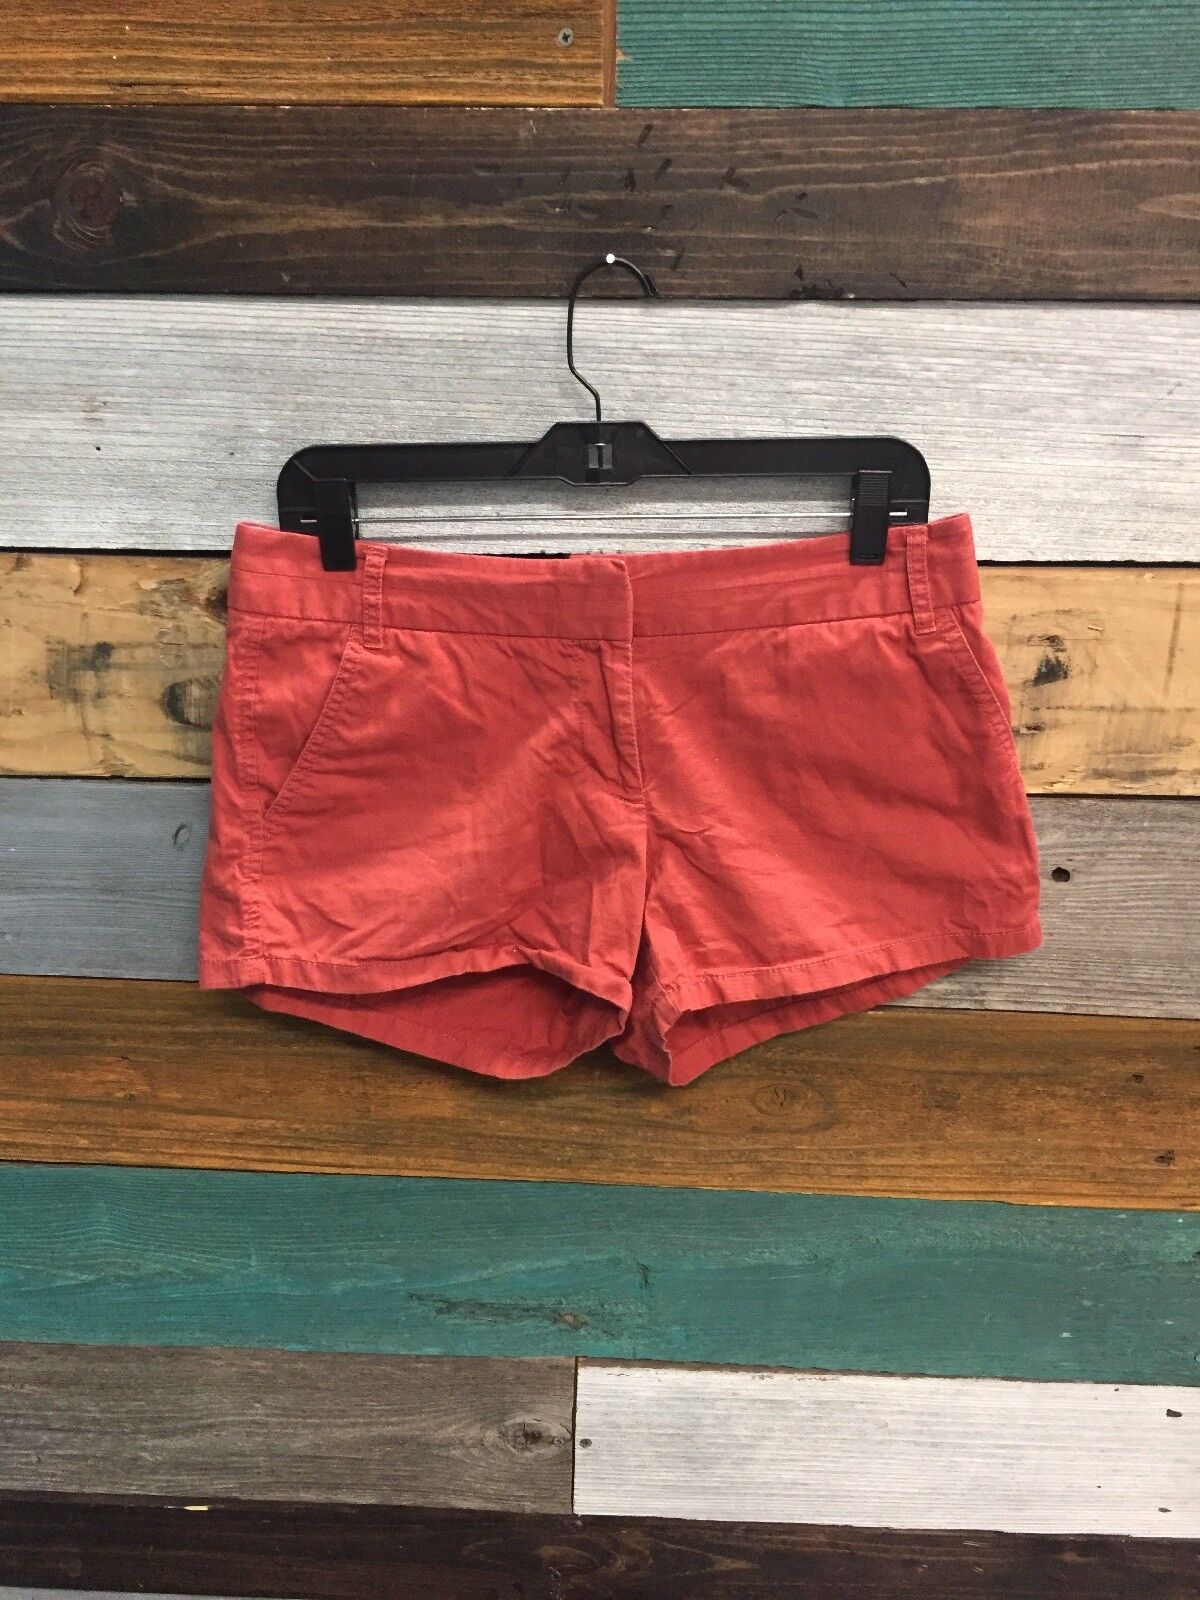 J.Crew Women's Chino Shorts Faded Red Size 6